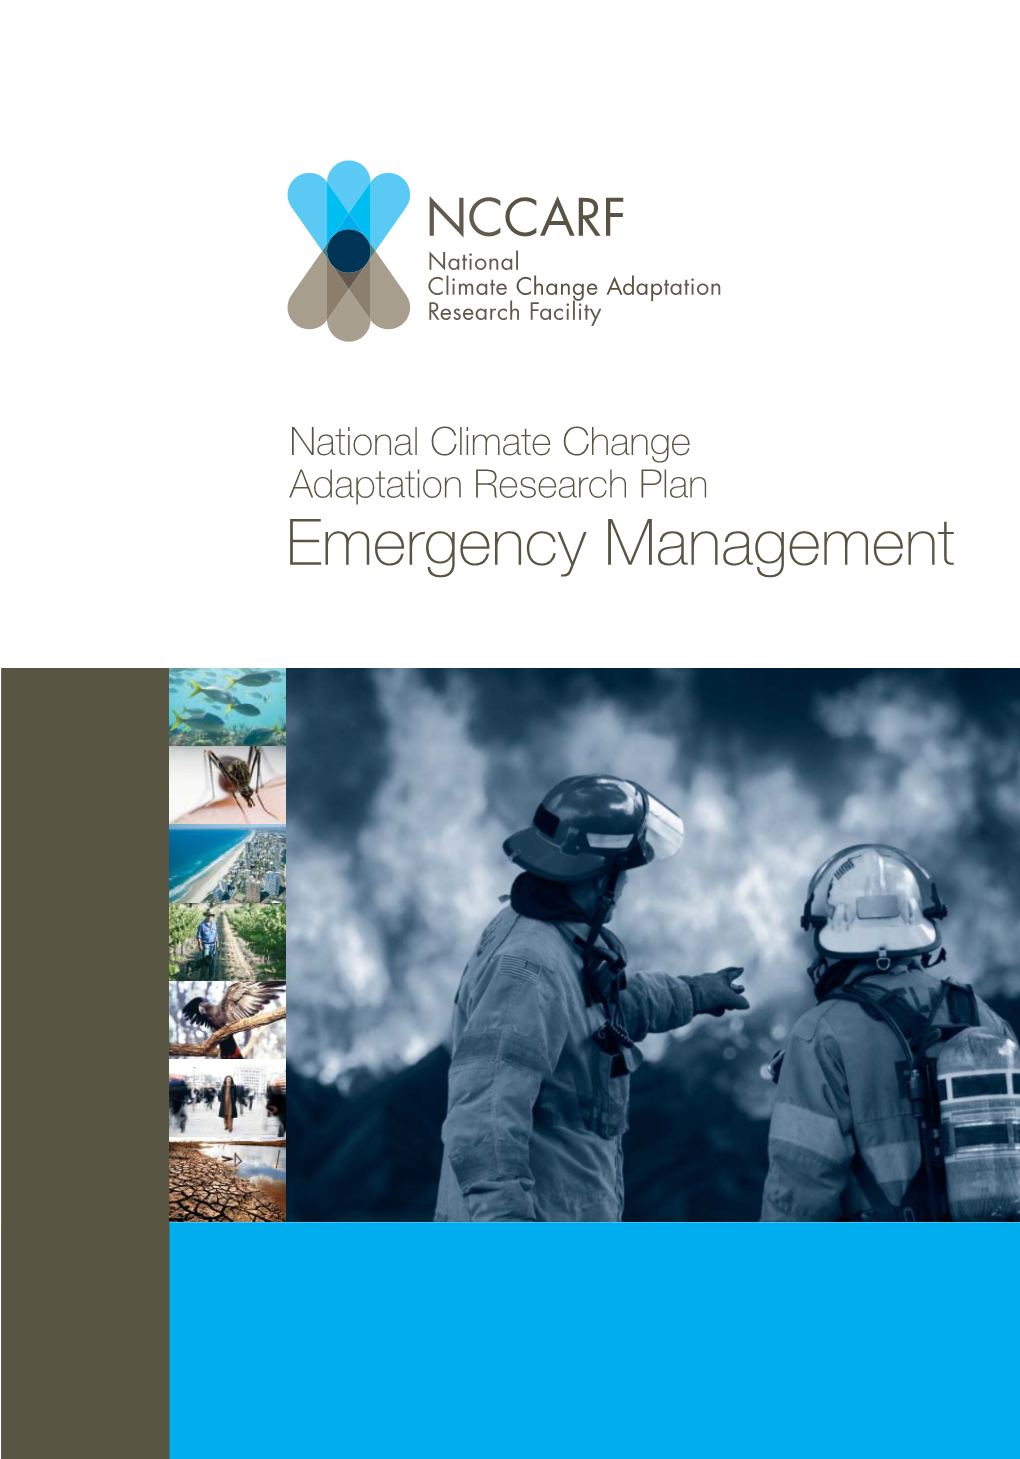 National Climate Change Adaptation Research Plan for Emergency Management